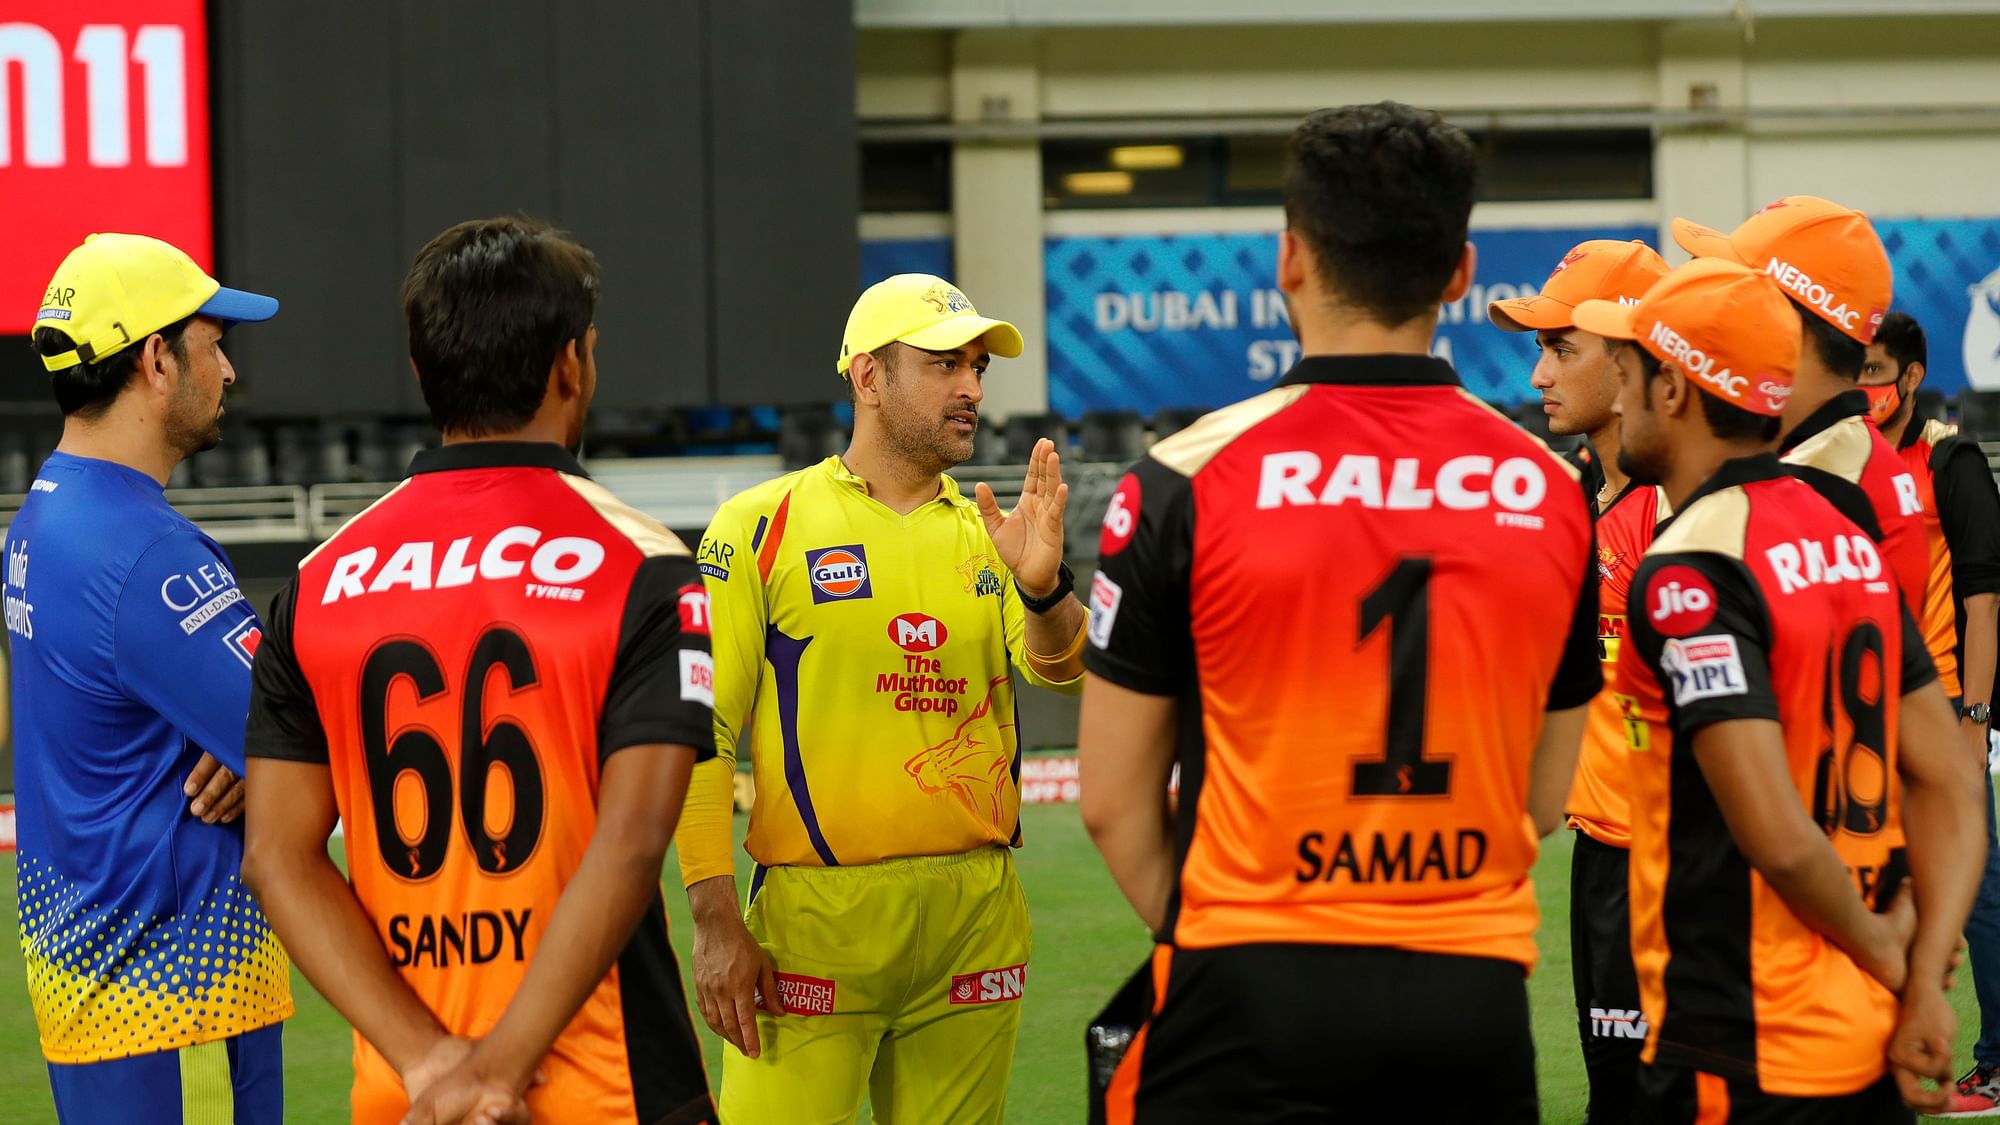 MS Dhoni wins hearts after he’s seen sharing tips with young players from the Sunrisers Hyderabad side.